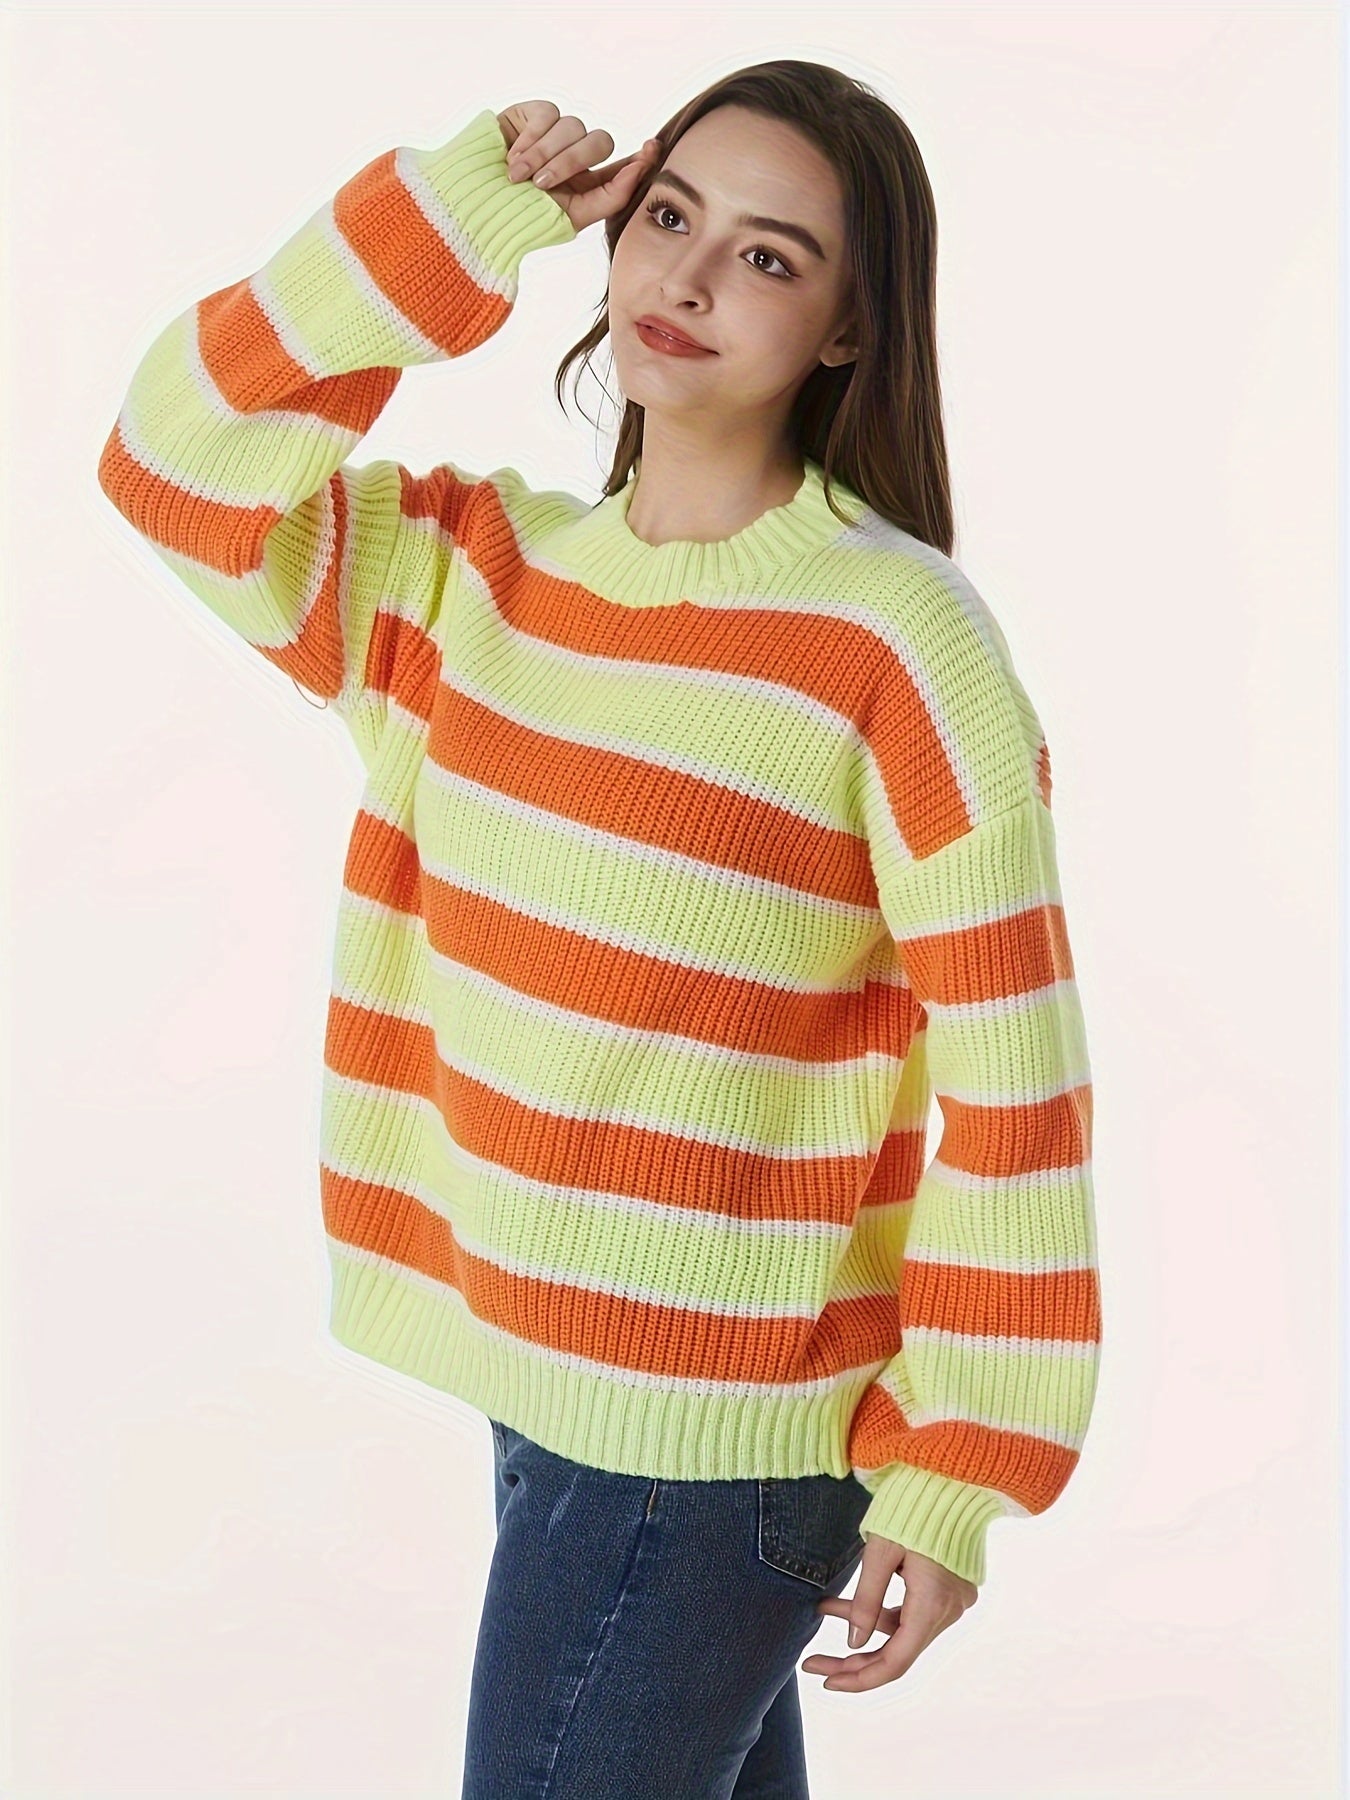 Antmvs Striped Crew Neck Pullover Sweater, Casual Long Sleeve Loose Sweater, Women's Clothing